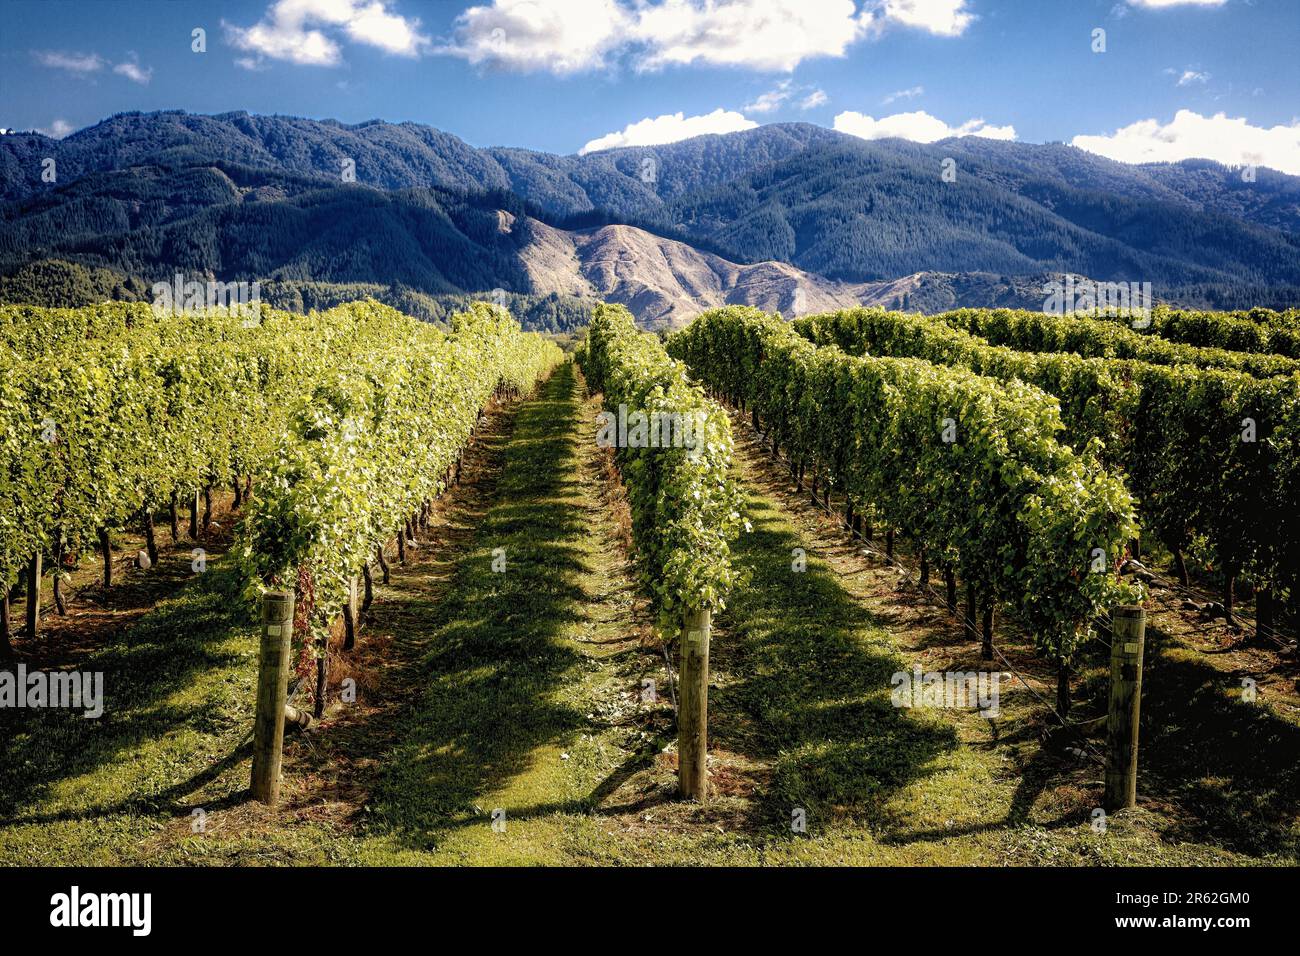 Rows and rows of vines stretch across the Marlborough Region on the South Island of New Zealand. Stock Photo